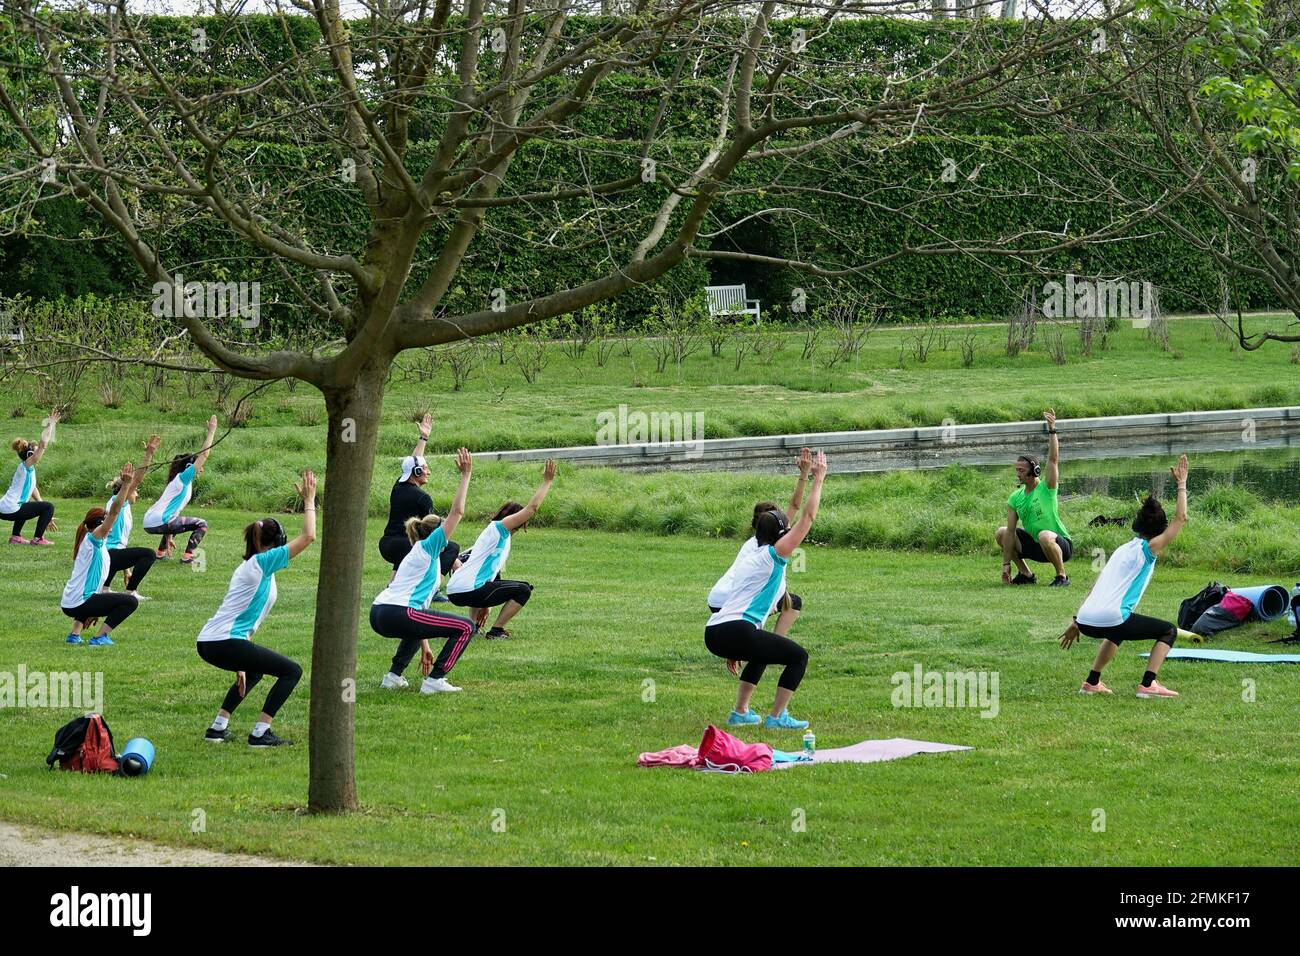 Training outdoors. Open air. People doing group exercise in the park keeping distance from each other. Social distancing after covid-19 coronavirus qu Stock Photo